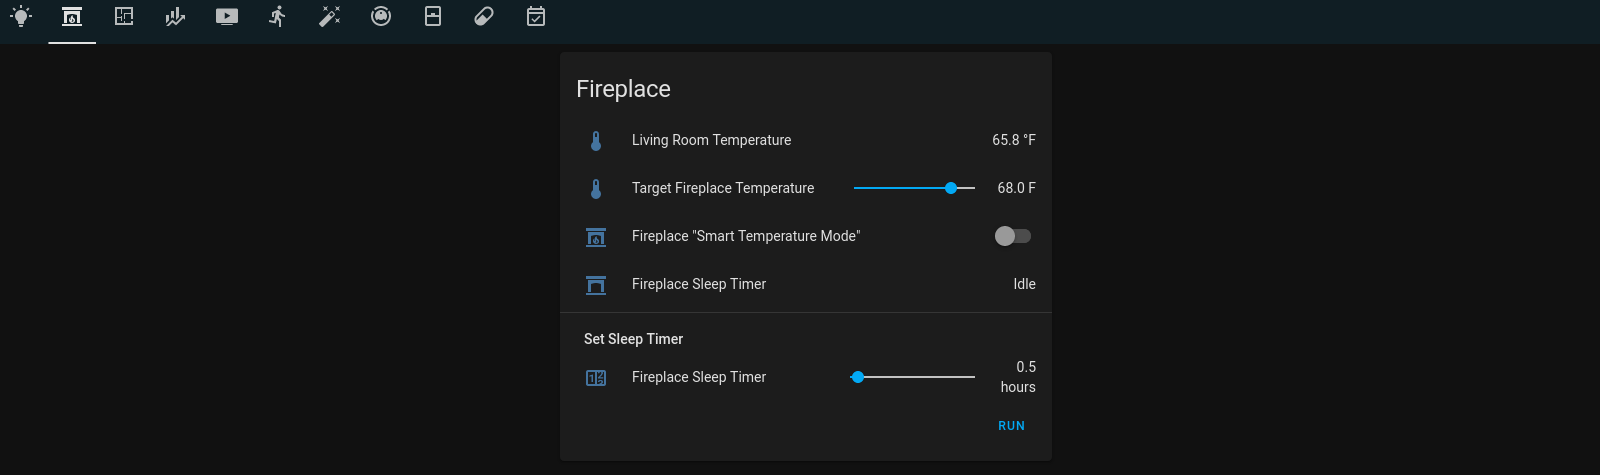 Fireplace control in the lovelace dashboard.